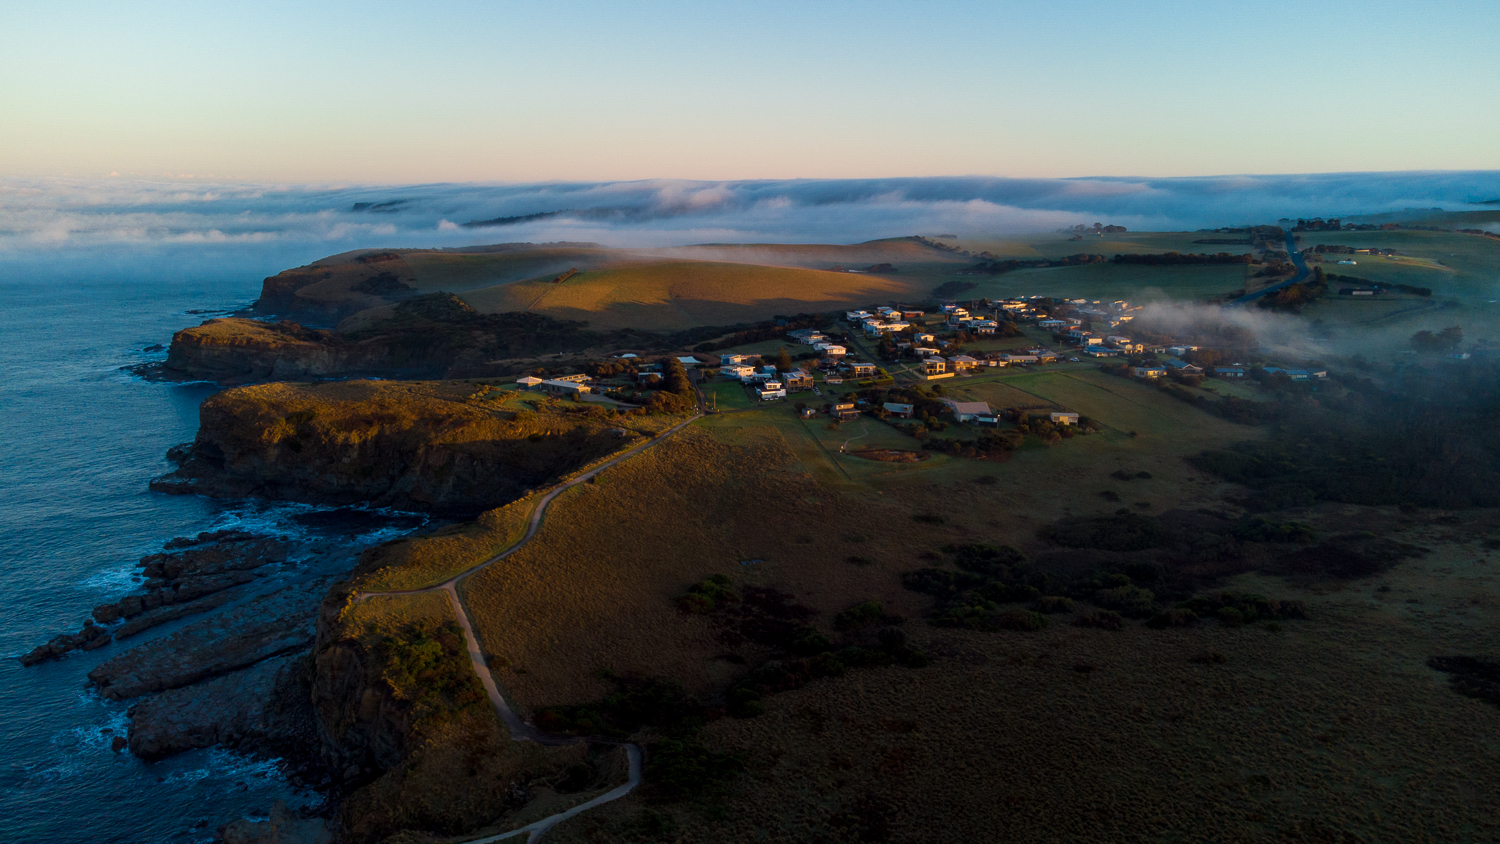 A scenic sunrise of a coastal town in Victoria. Photo taken from drone.